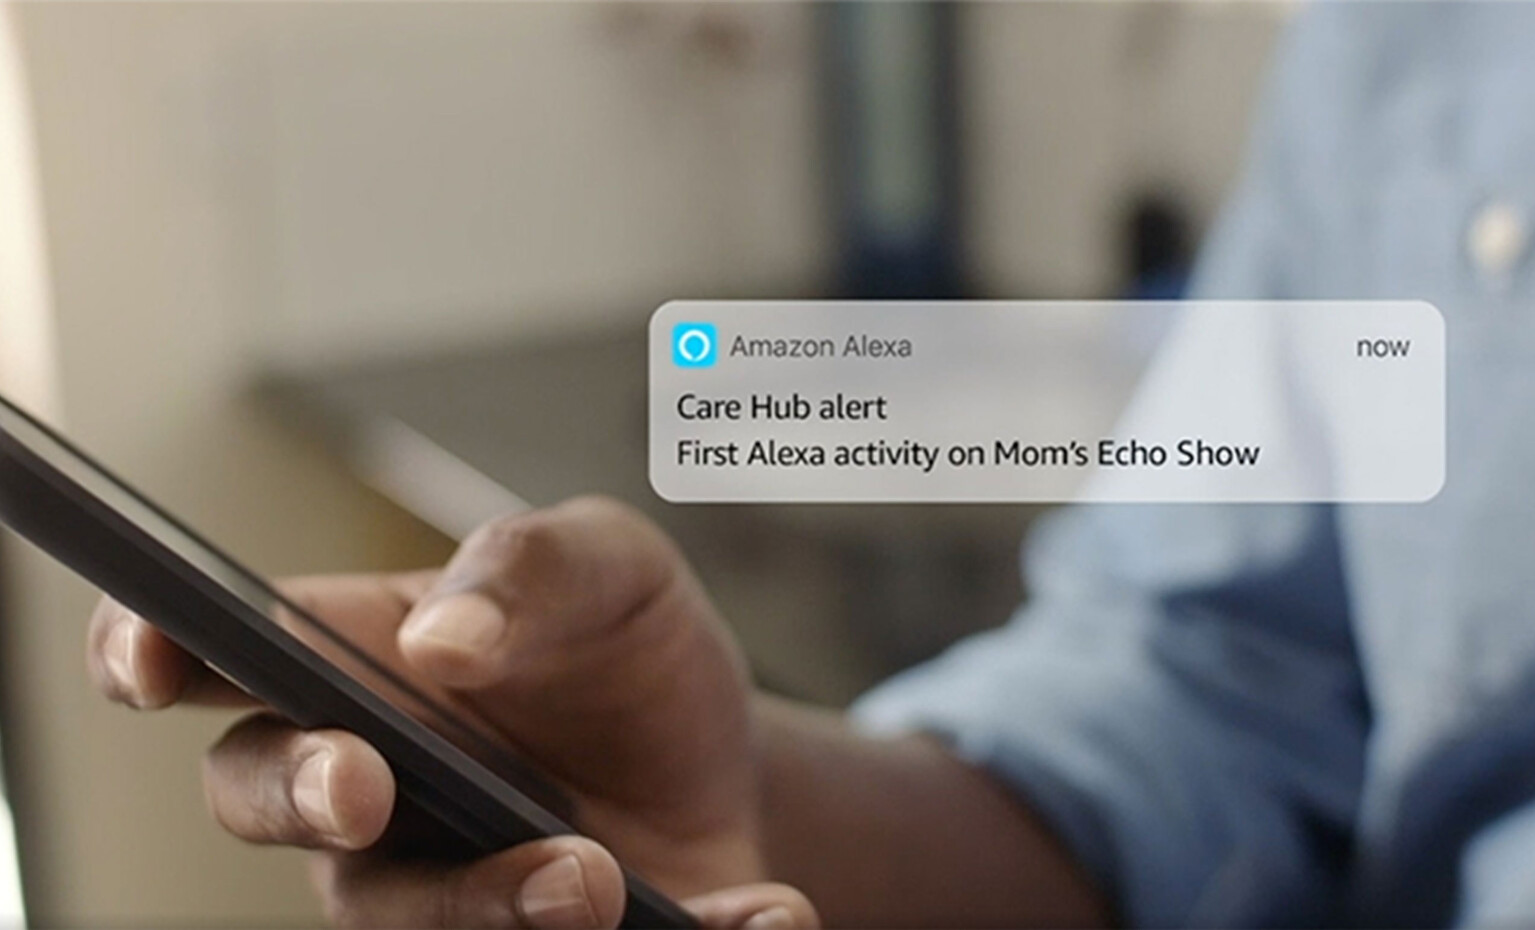 Closeup of a person holding their mobile phone. A message from Amazon Alexa being shown next to it says: "Care Hub alert - First Alexa activity on Mom's Echo Show"